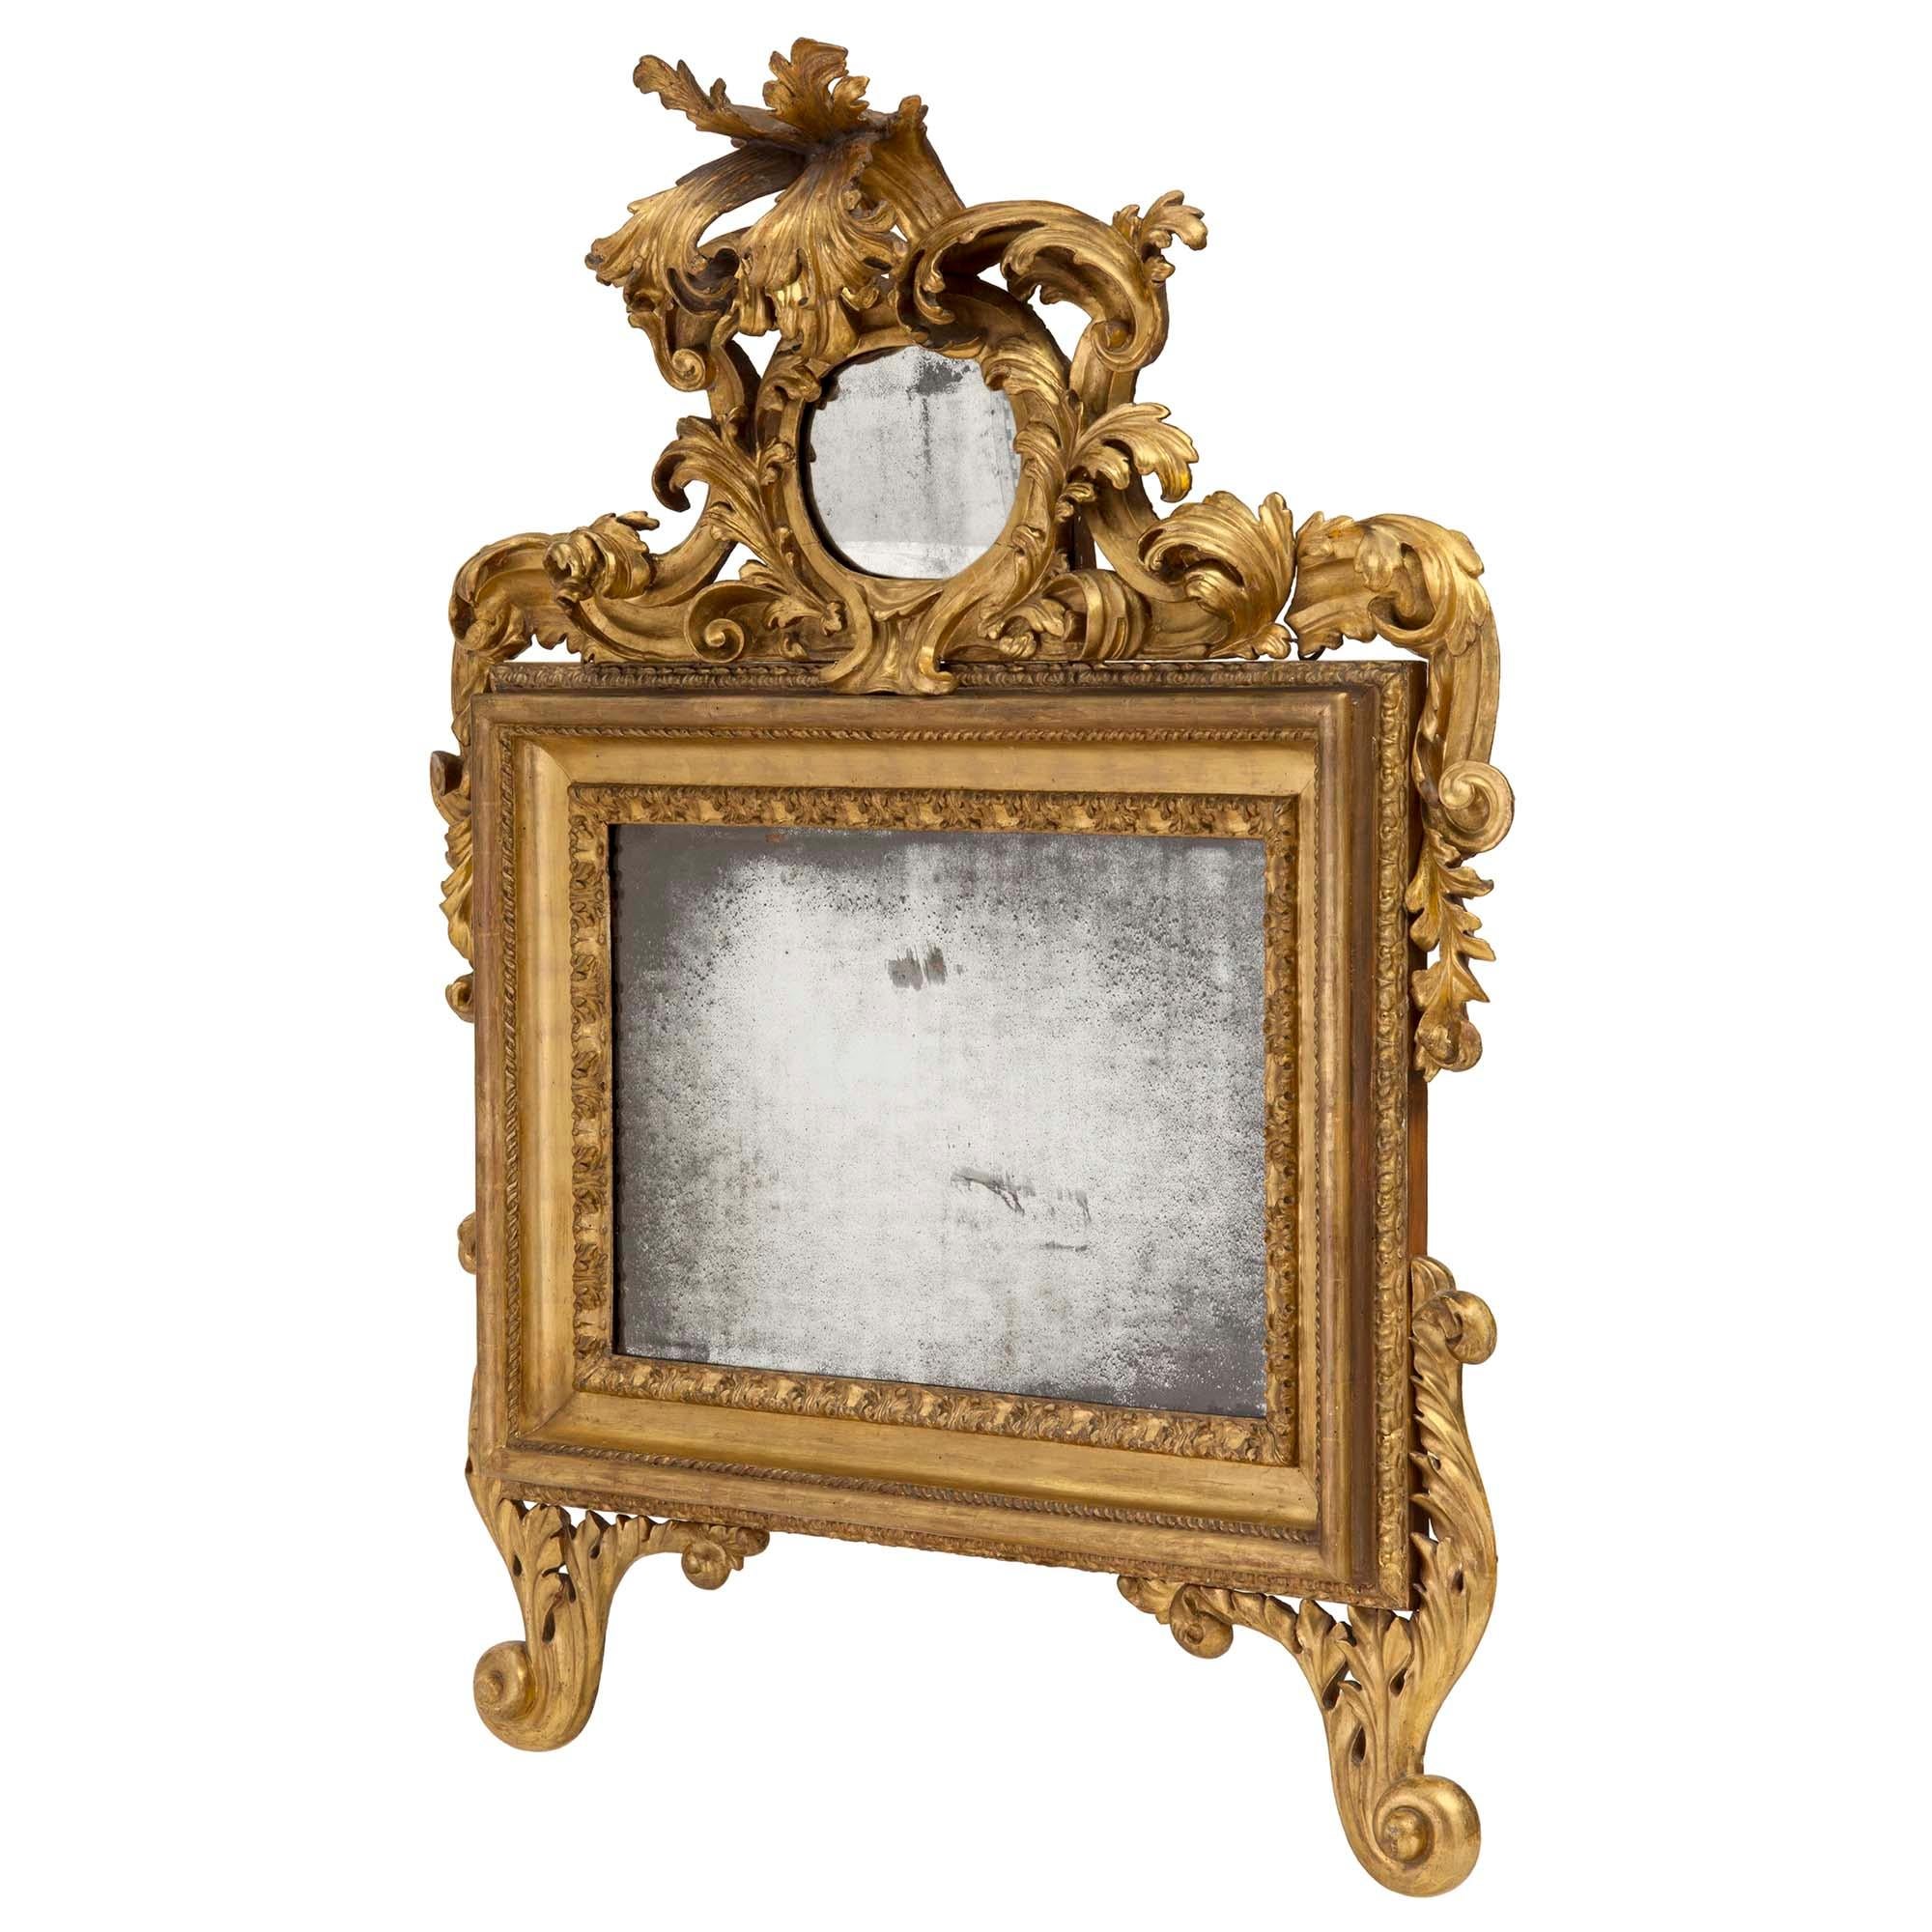 A most impressive Italian 18th-century giltwood Roman mirror. The mirror is raised by beautiful scrolled pieced foliate designed legs. The original central mirror plate is framed within a richly carved foliate mottled border and a twisted rope